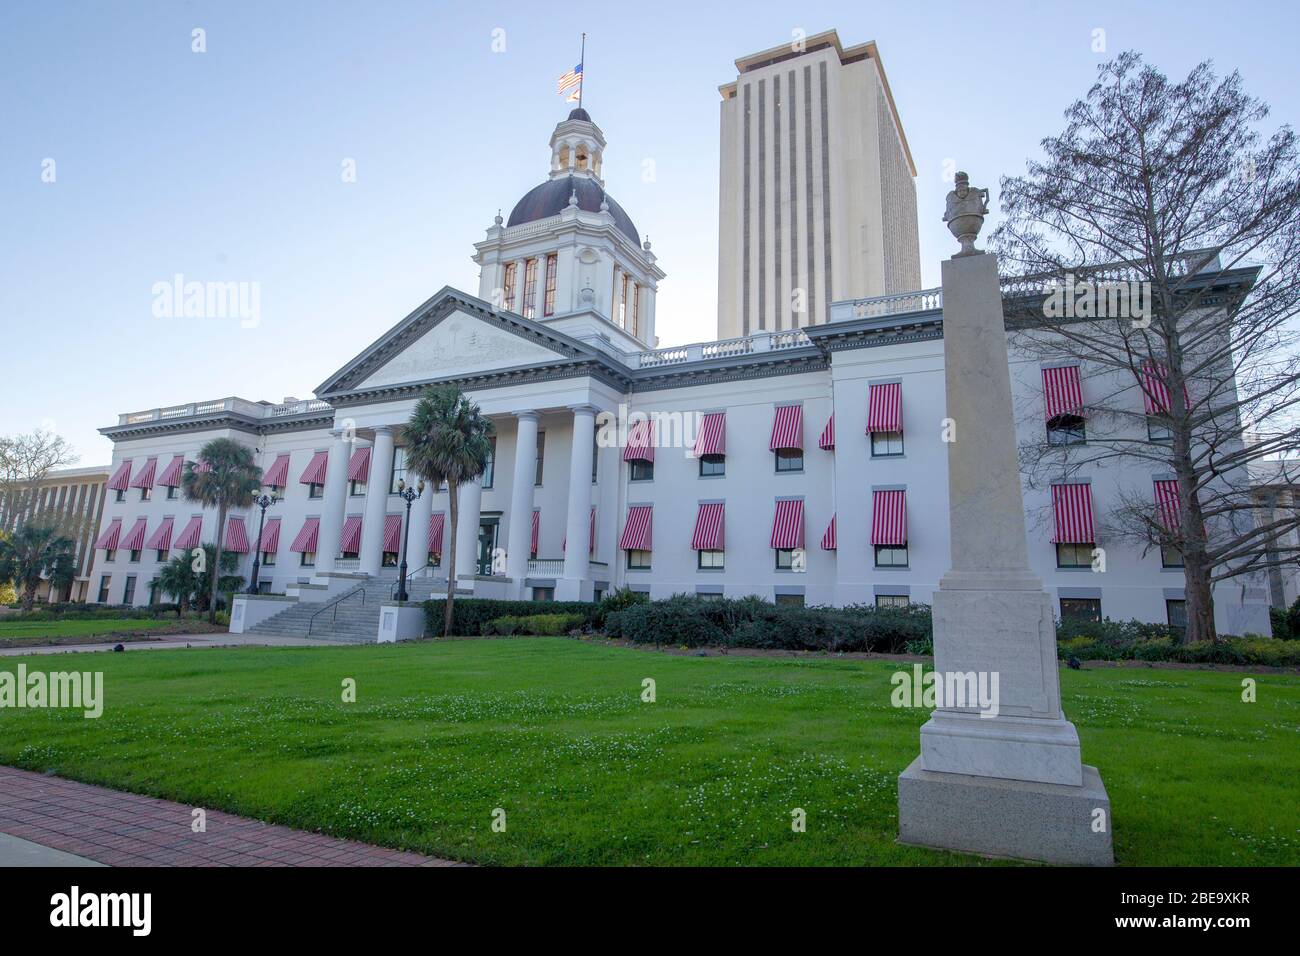 The  old and new Florida State Capitol buildings in Tallahassee, Florida. Stock Photo